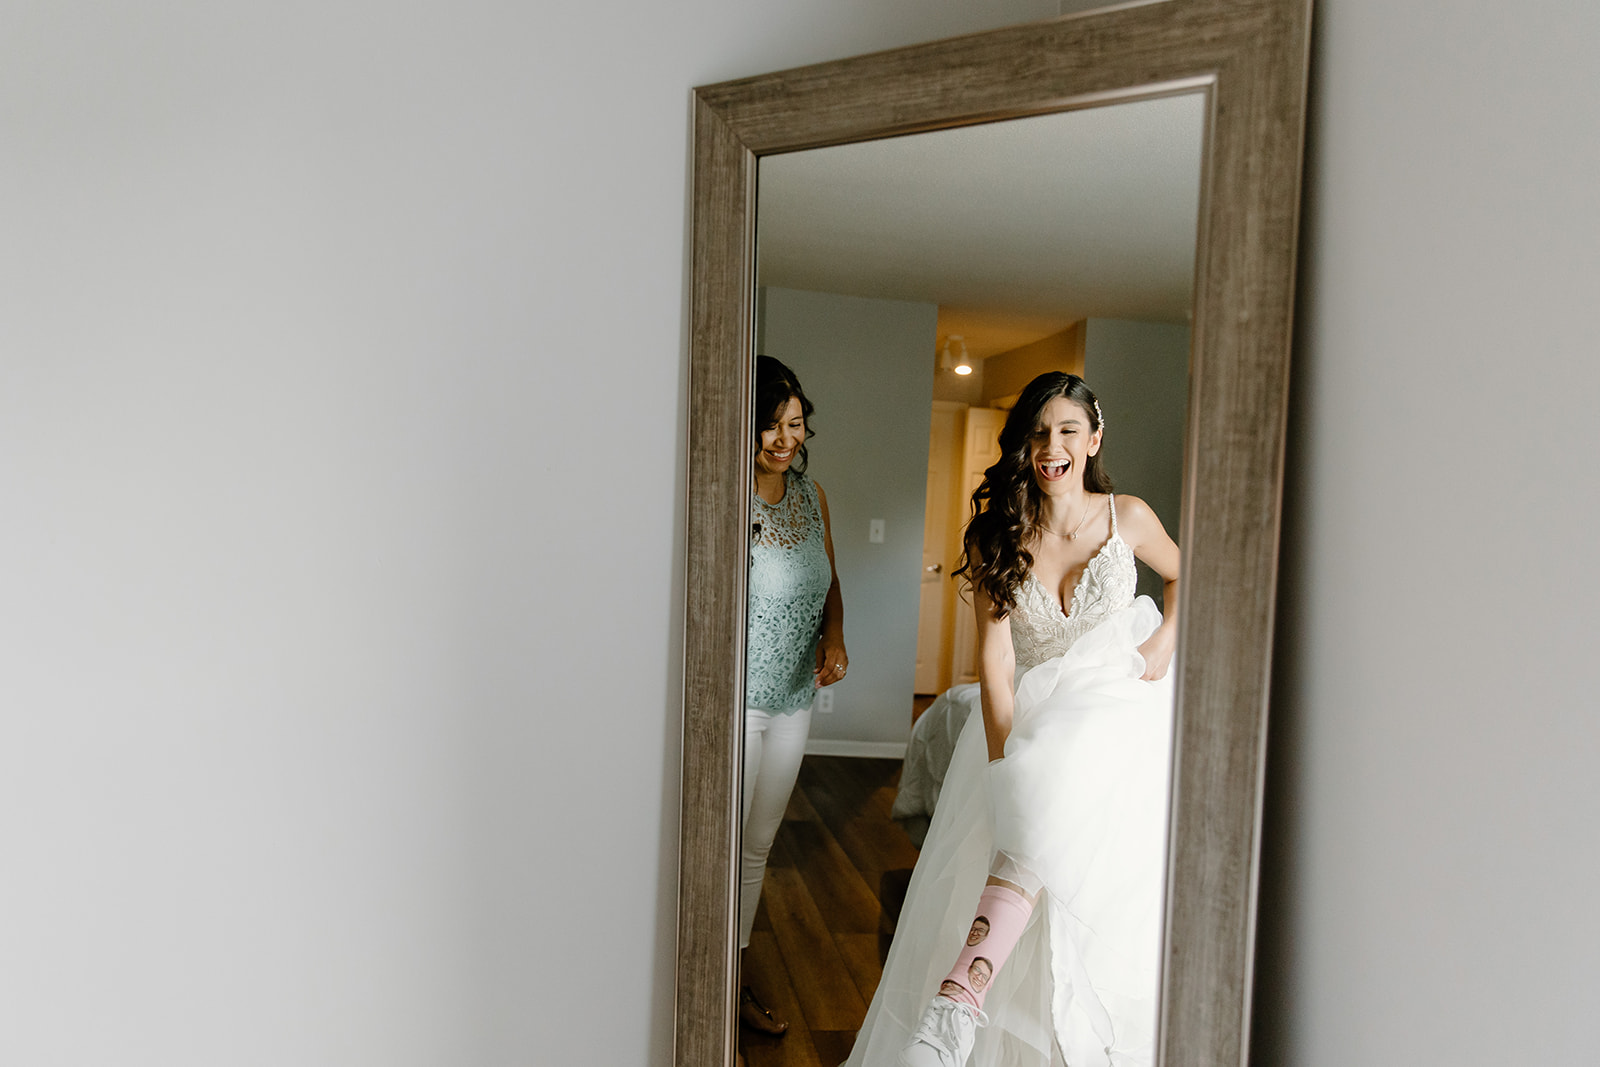 Bride shows off her socks in a mirror